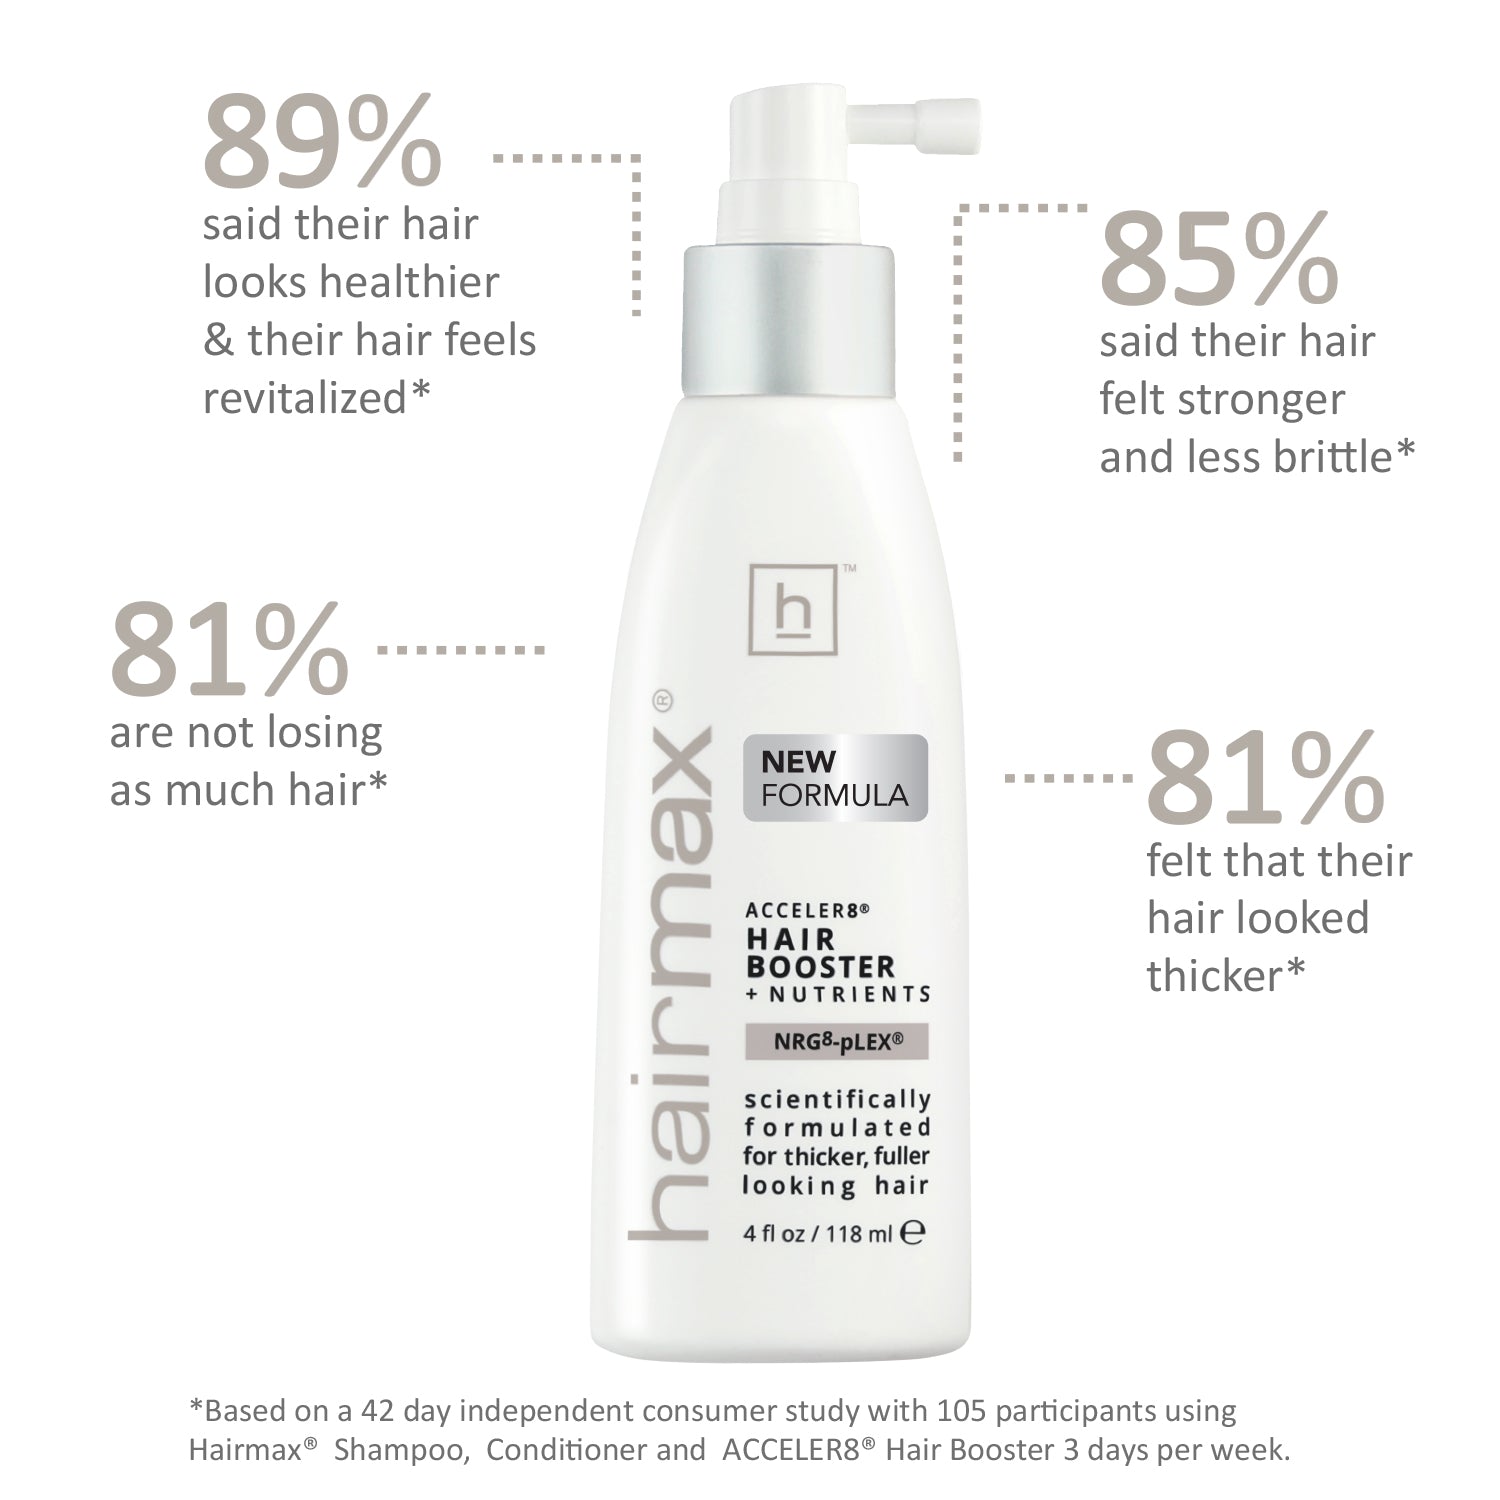 Acceler8® Hair Booster + Nutrients